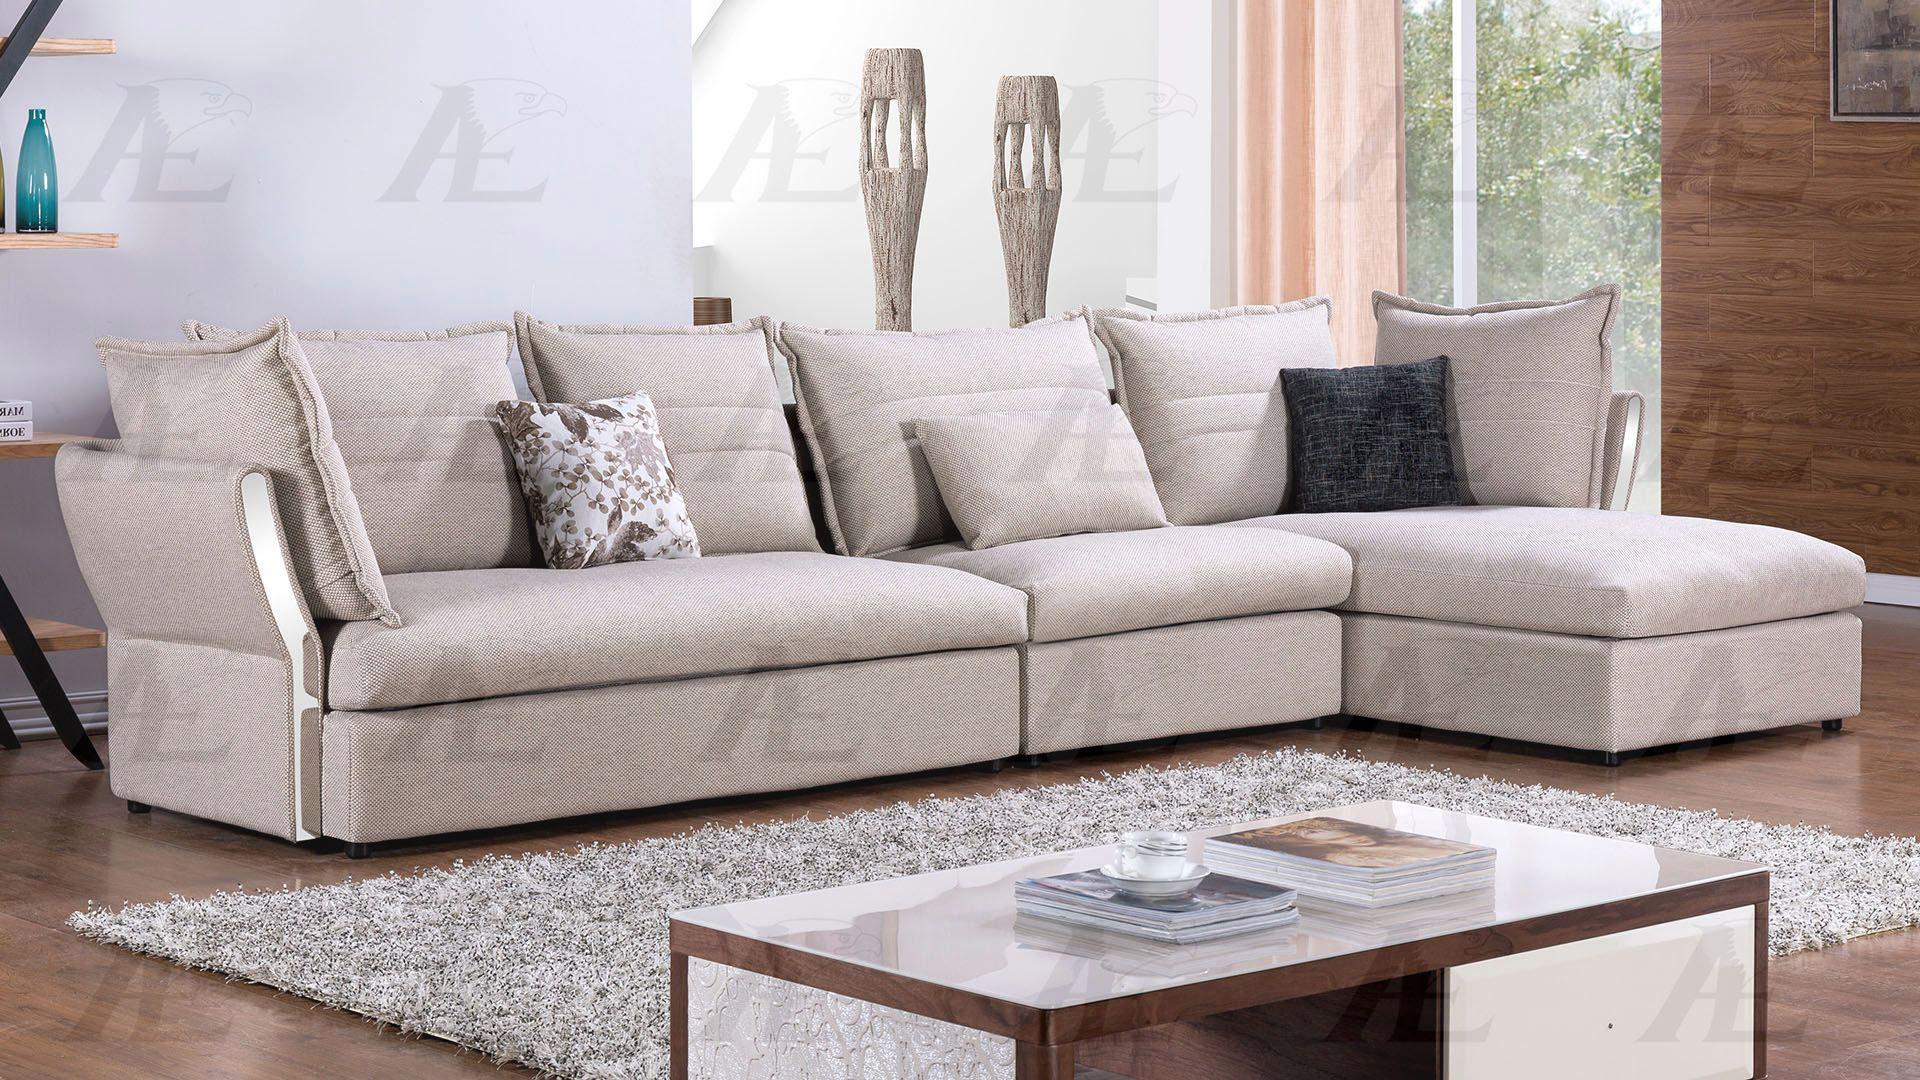 

    
American Eagle Furniture AE-L2319 Gray Fabric Tufted Sectional Sofa Chaise and Chair Set Right Hand Chase 3Pcs
